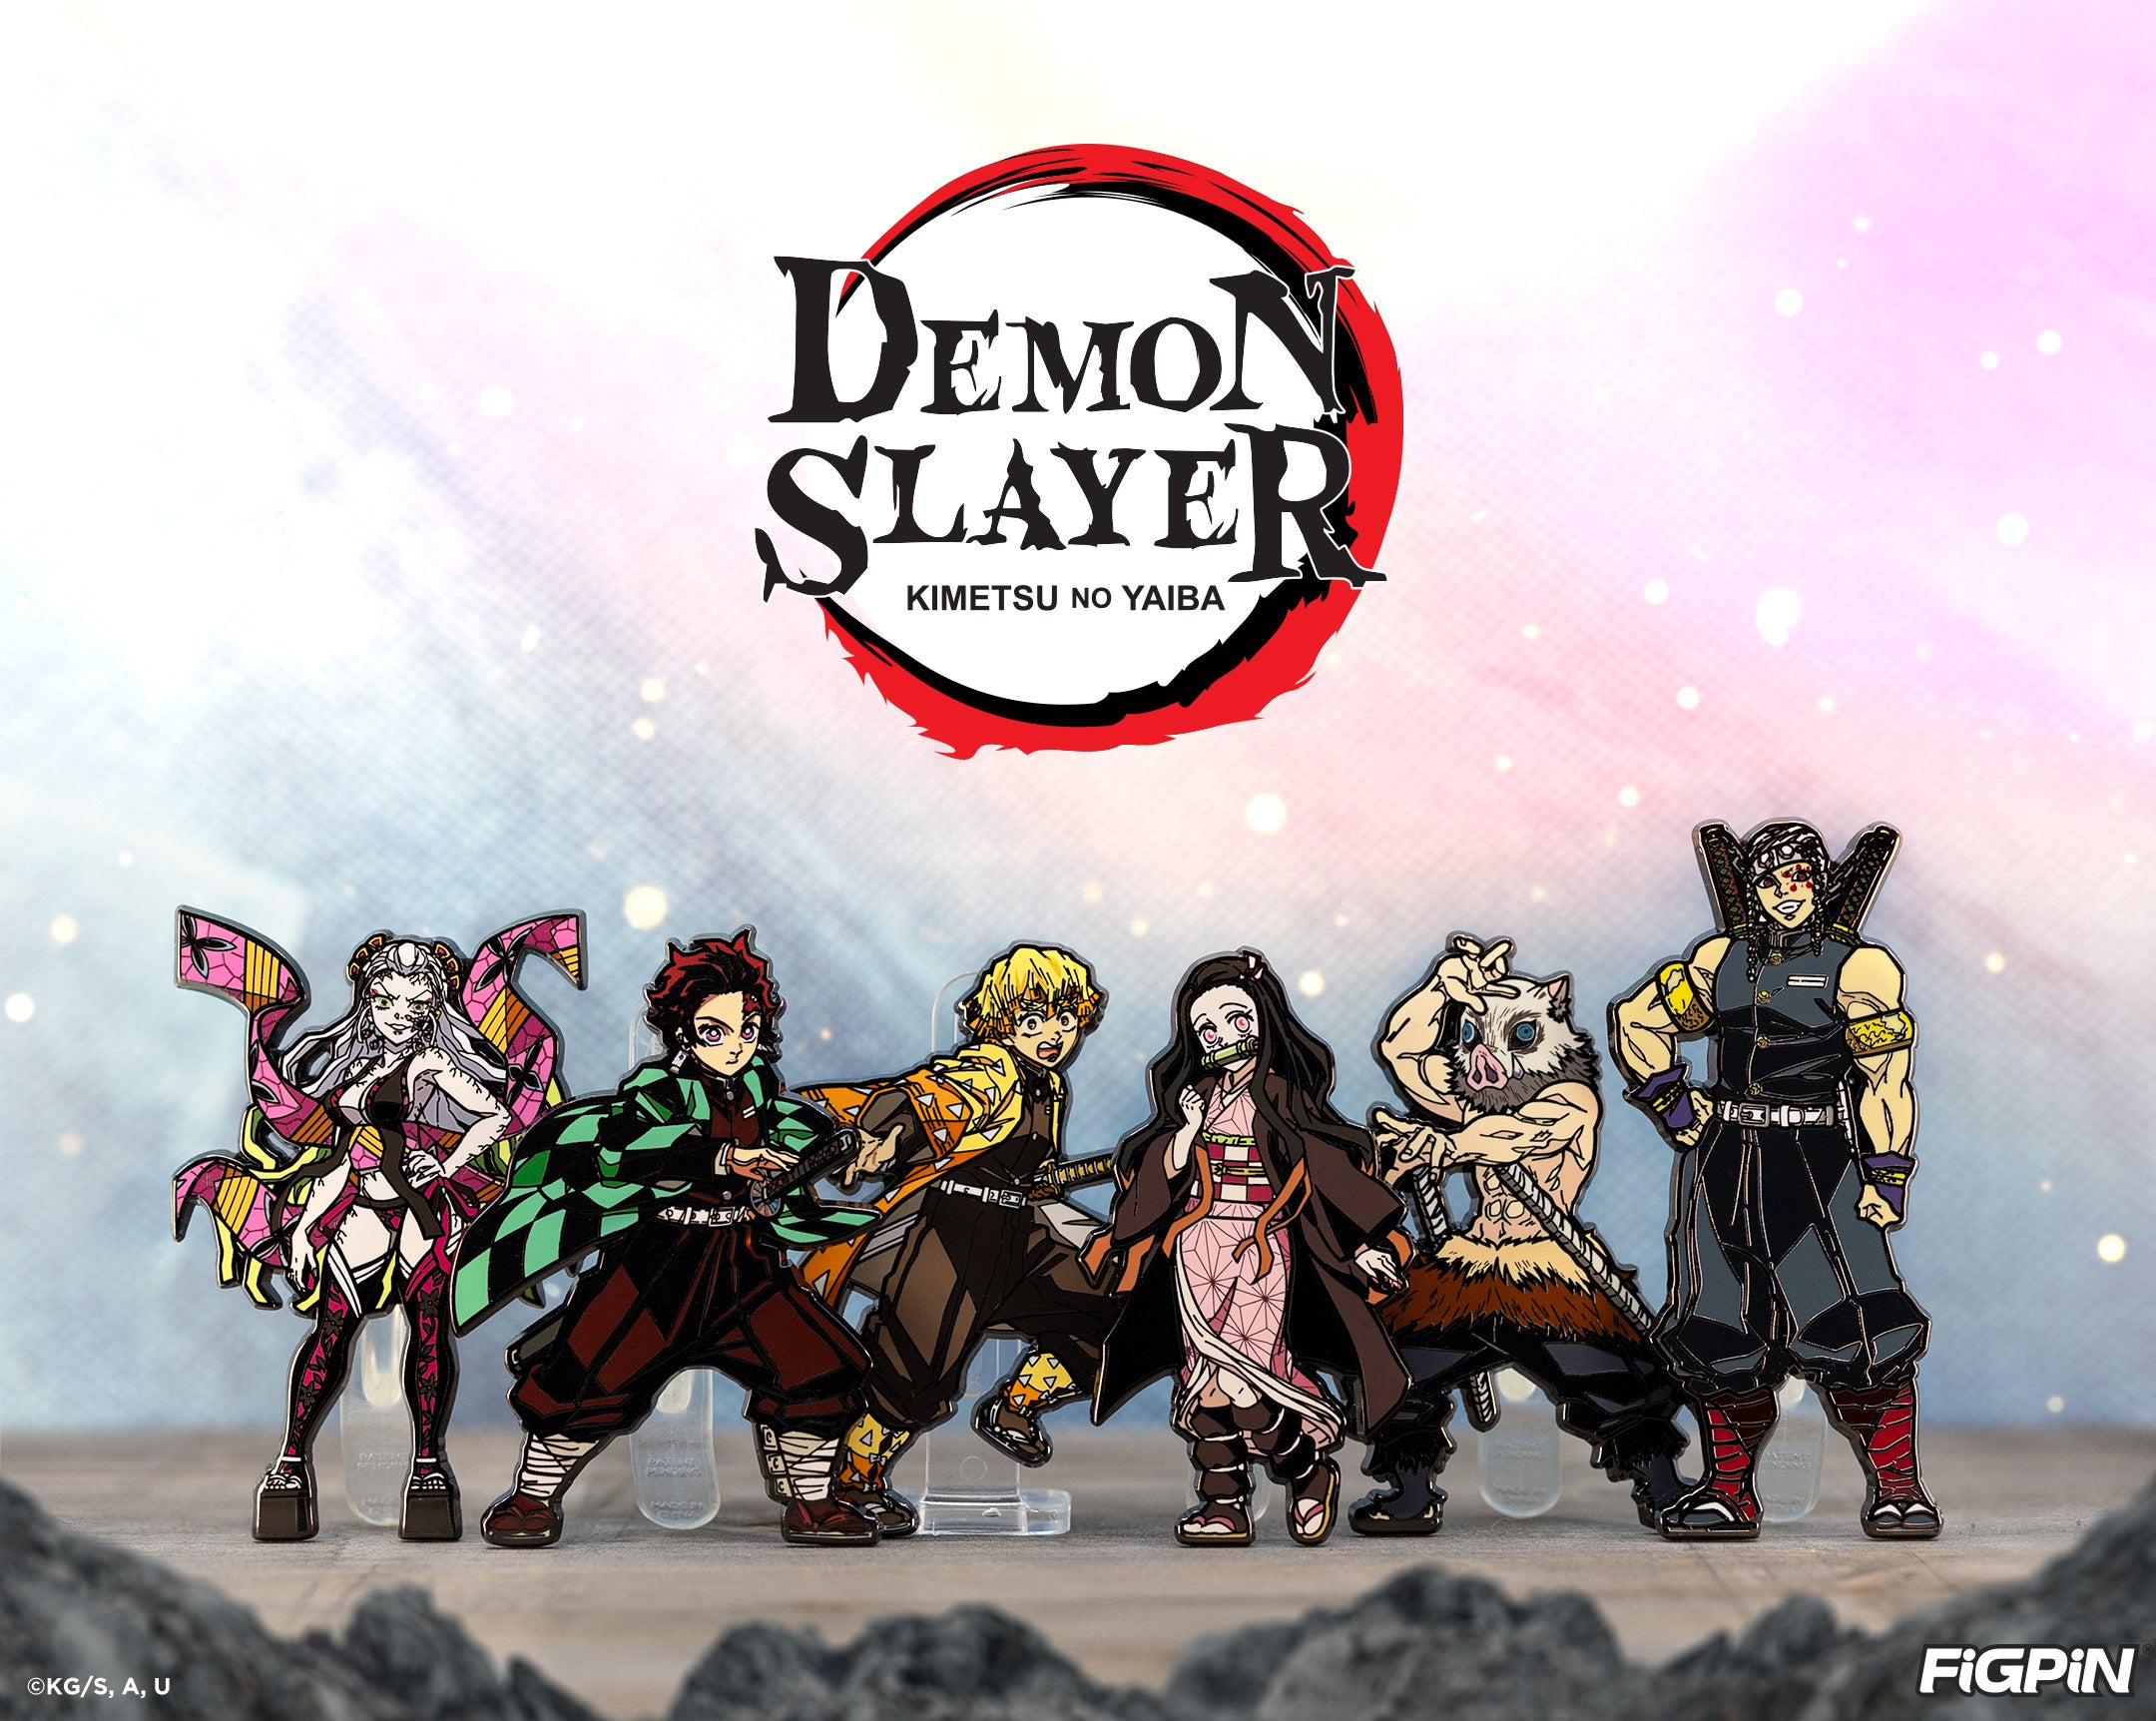 Photograph of Demon Slayer characters available as enamel pins in this Demon Slayer FiGPiN wave release